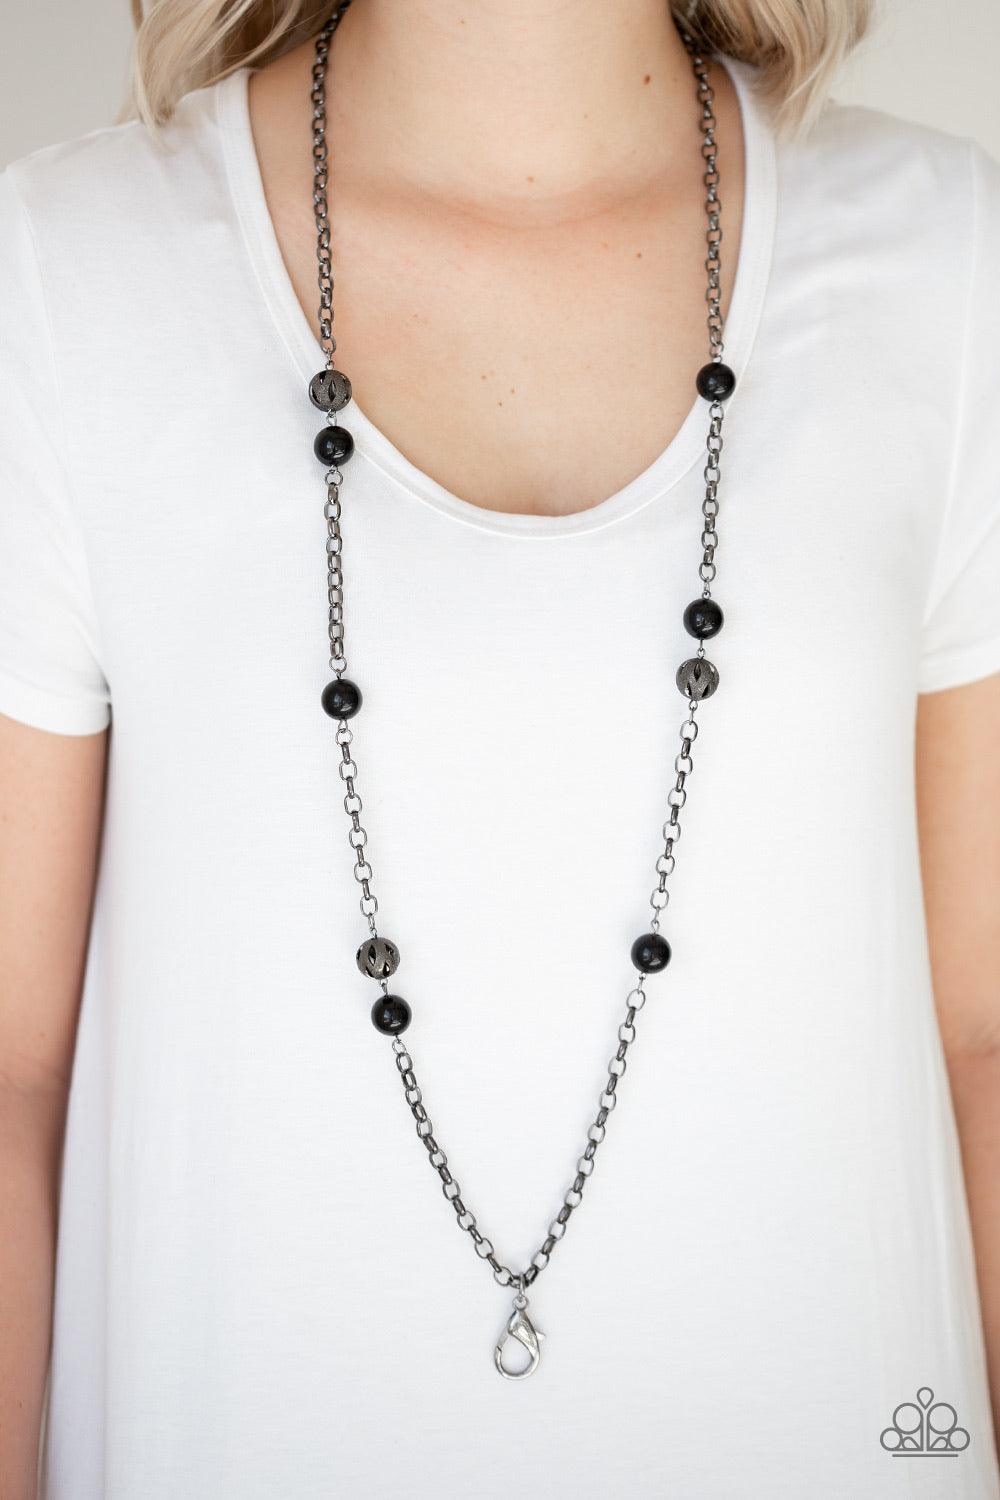 Paparazzi Accessories Fashion Fad - Black *Lanyard Shiny black beads and ornate gunmetal beads trickle along a bold gunmetal chain, creating a colorfully industrial look across the chest. A lobster clasp hangs from the bottom of the design to allow a name